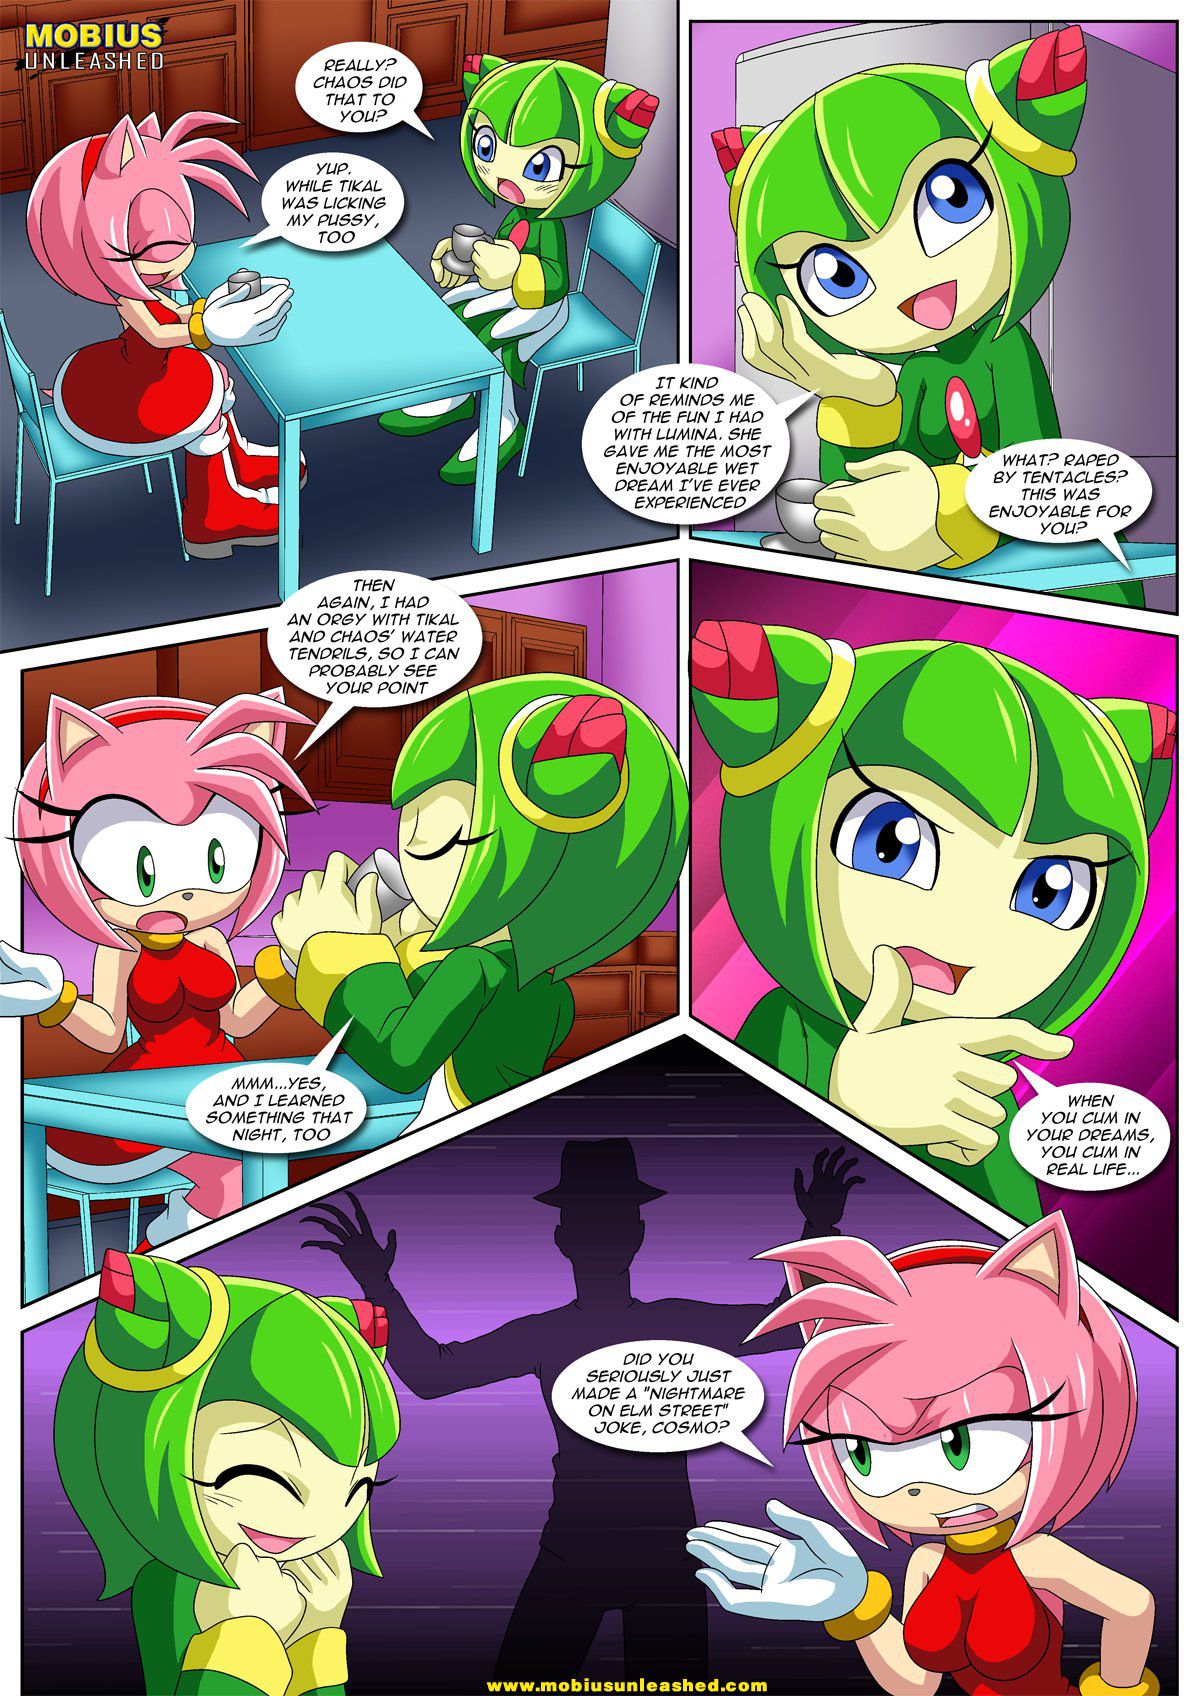 [Palcomix] Team GF's Tentacled Tale (Sonic The Hedgehog) [Ongoing] 2